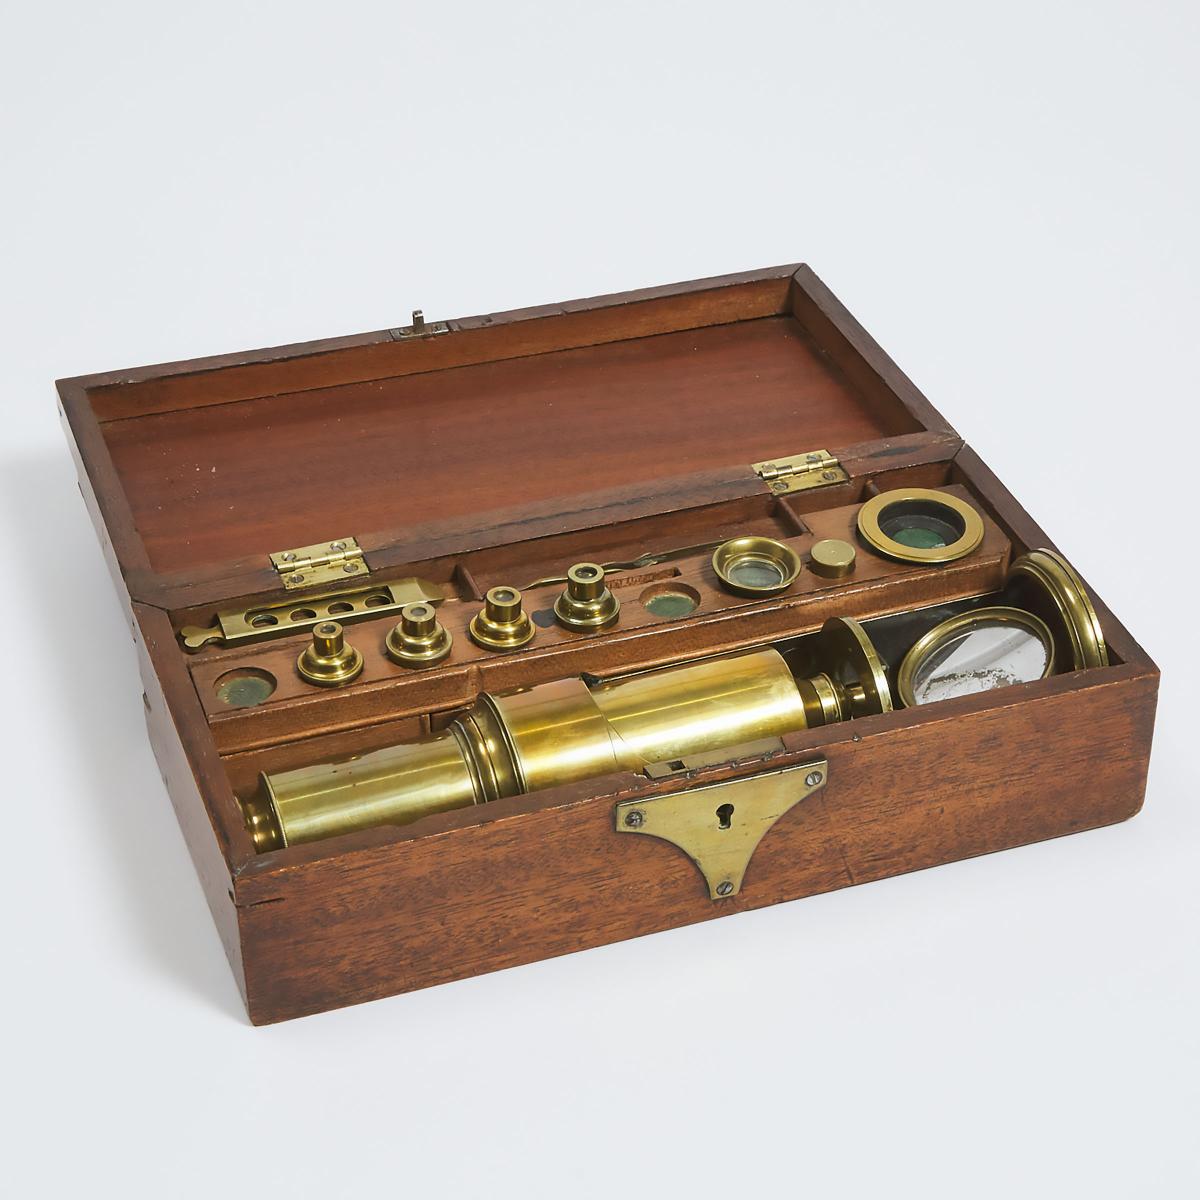 Victorian Lacquered Brass Culpepper Type Microscope, mid 19th century, instrument mid height 11 in — - Image 2 of 3